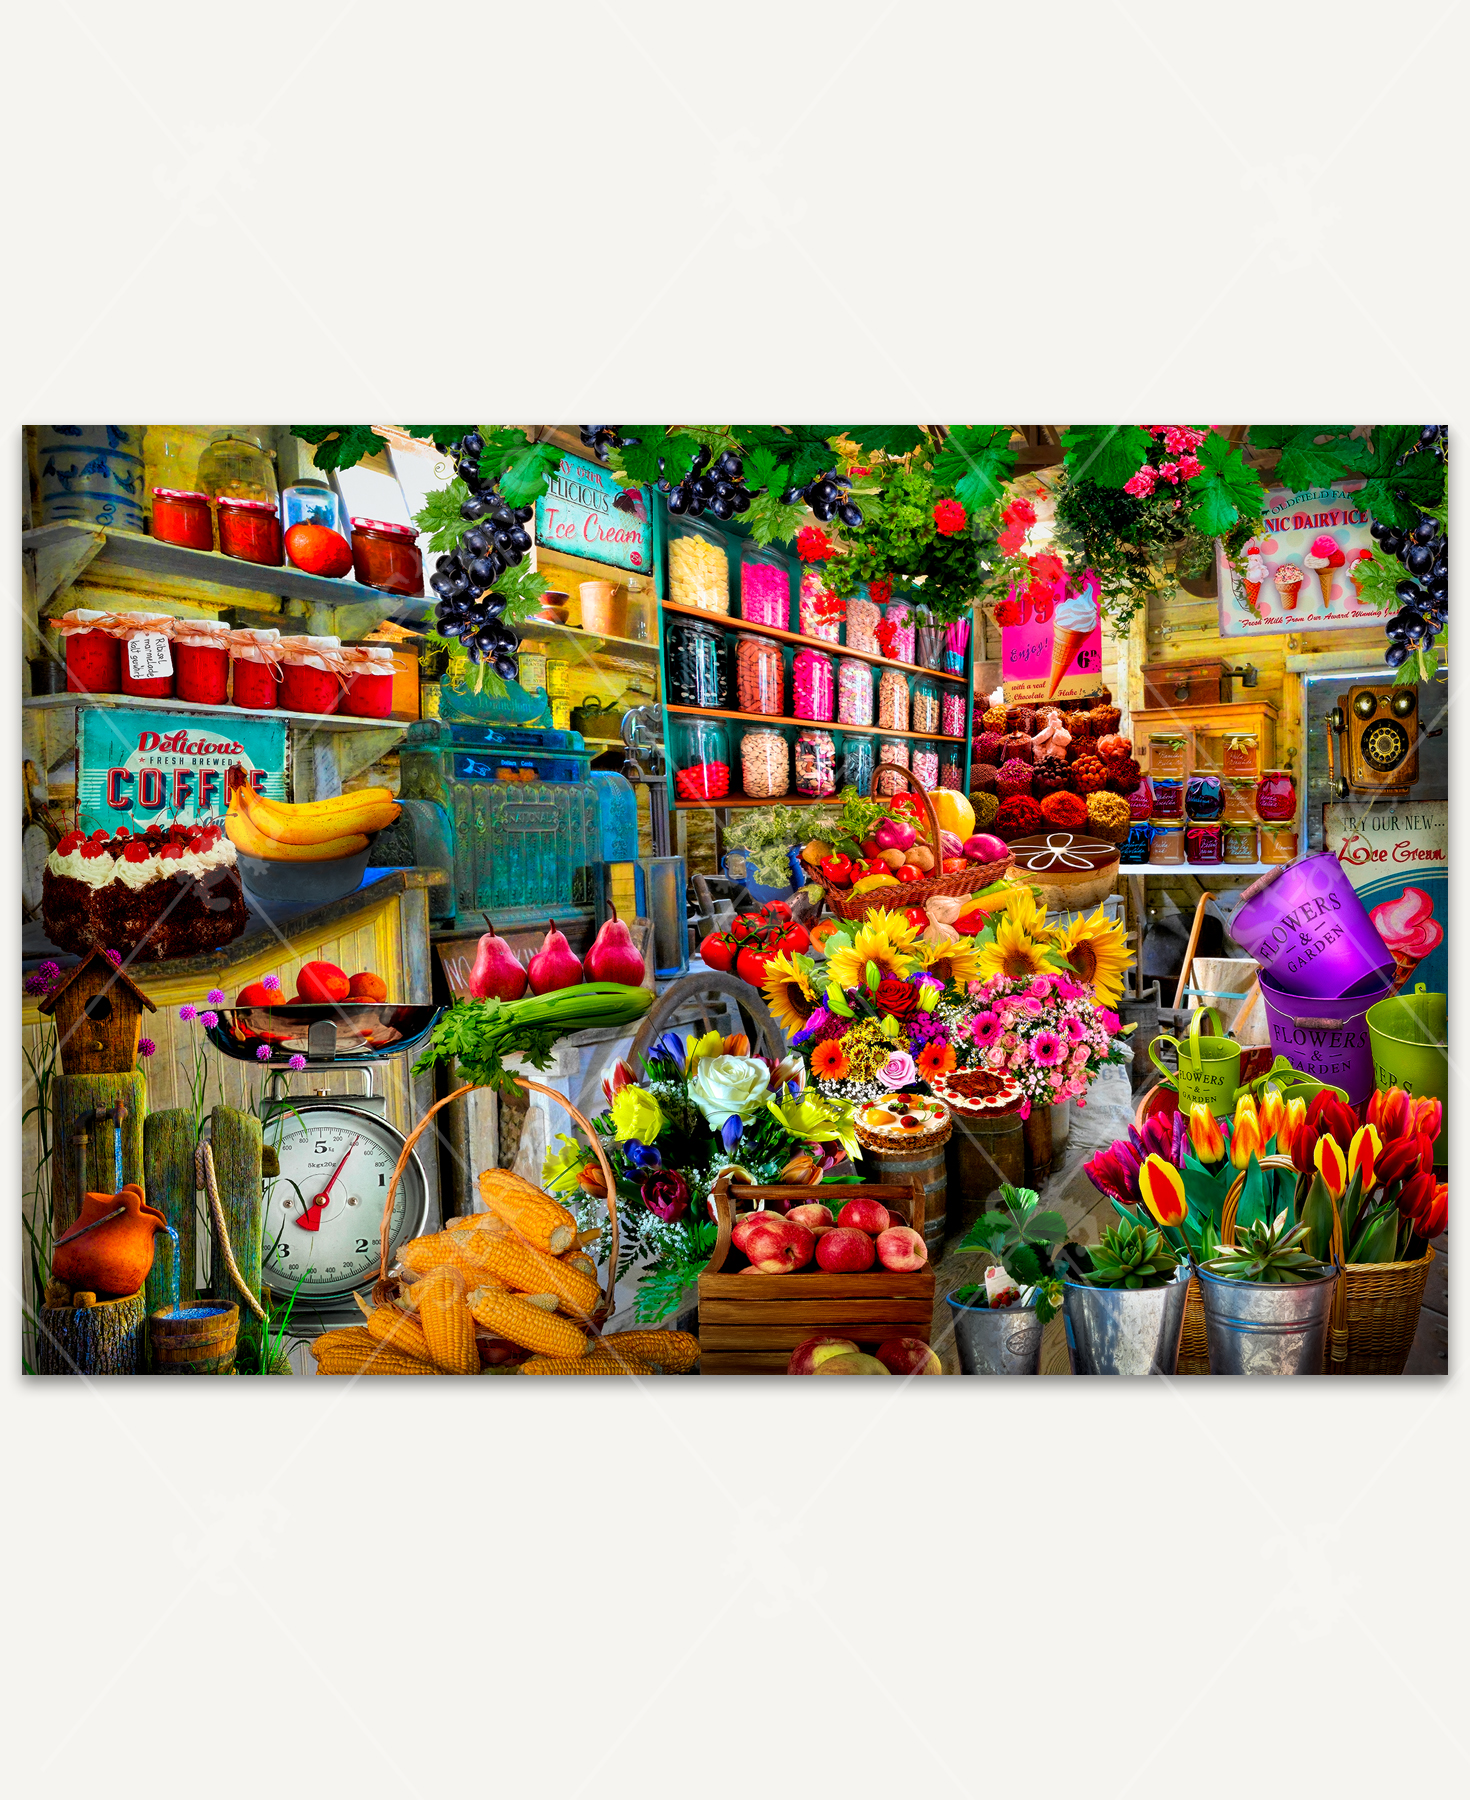 Market Fresh wooden jigsaw puzzle brings viewers inside a market of locally grown produce. The wall on the left side is covered in shelves and jars of products, while the back wall has a table of jams and bouquets of flowers. Vegetables, flowers, and desserts stacked on barrels sit in the middle of the store. Grape vines and flowers hang from the ceiling.